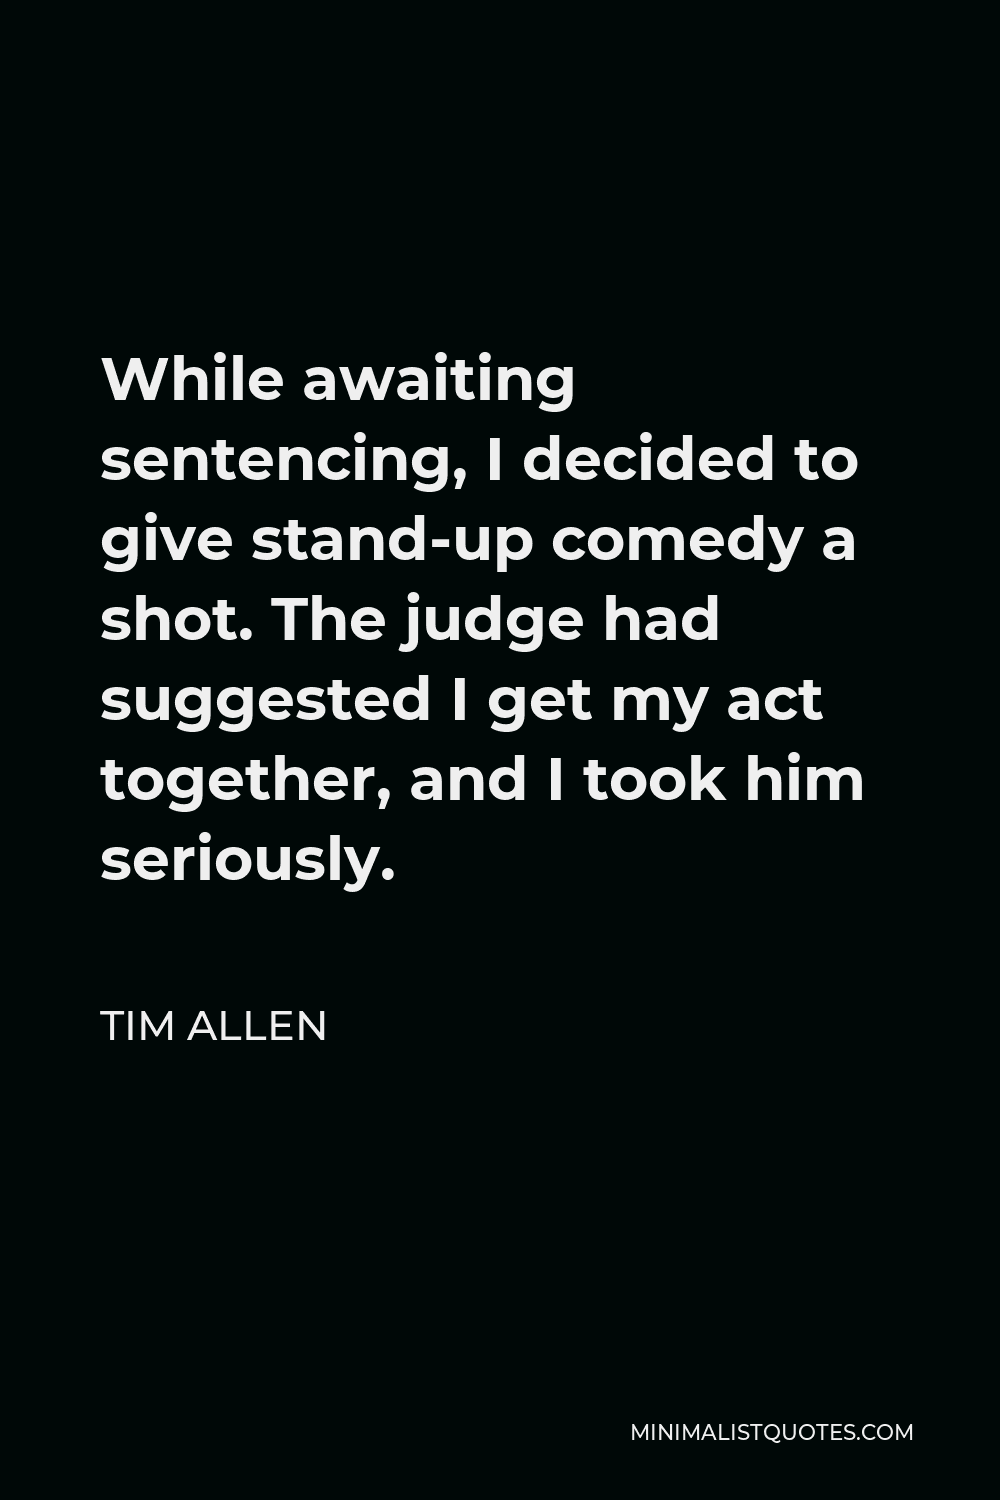 Tim Allen Quote - While awaiting sentencing, I decided to give stand-up comedy a shot. The judge had suggested I get my act together, and I took him seriously.